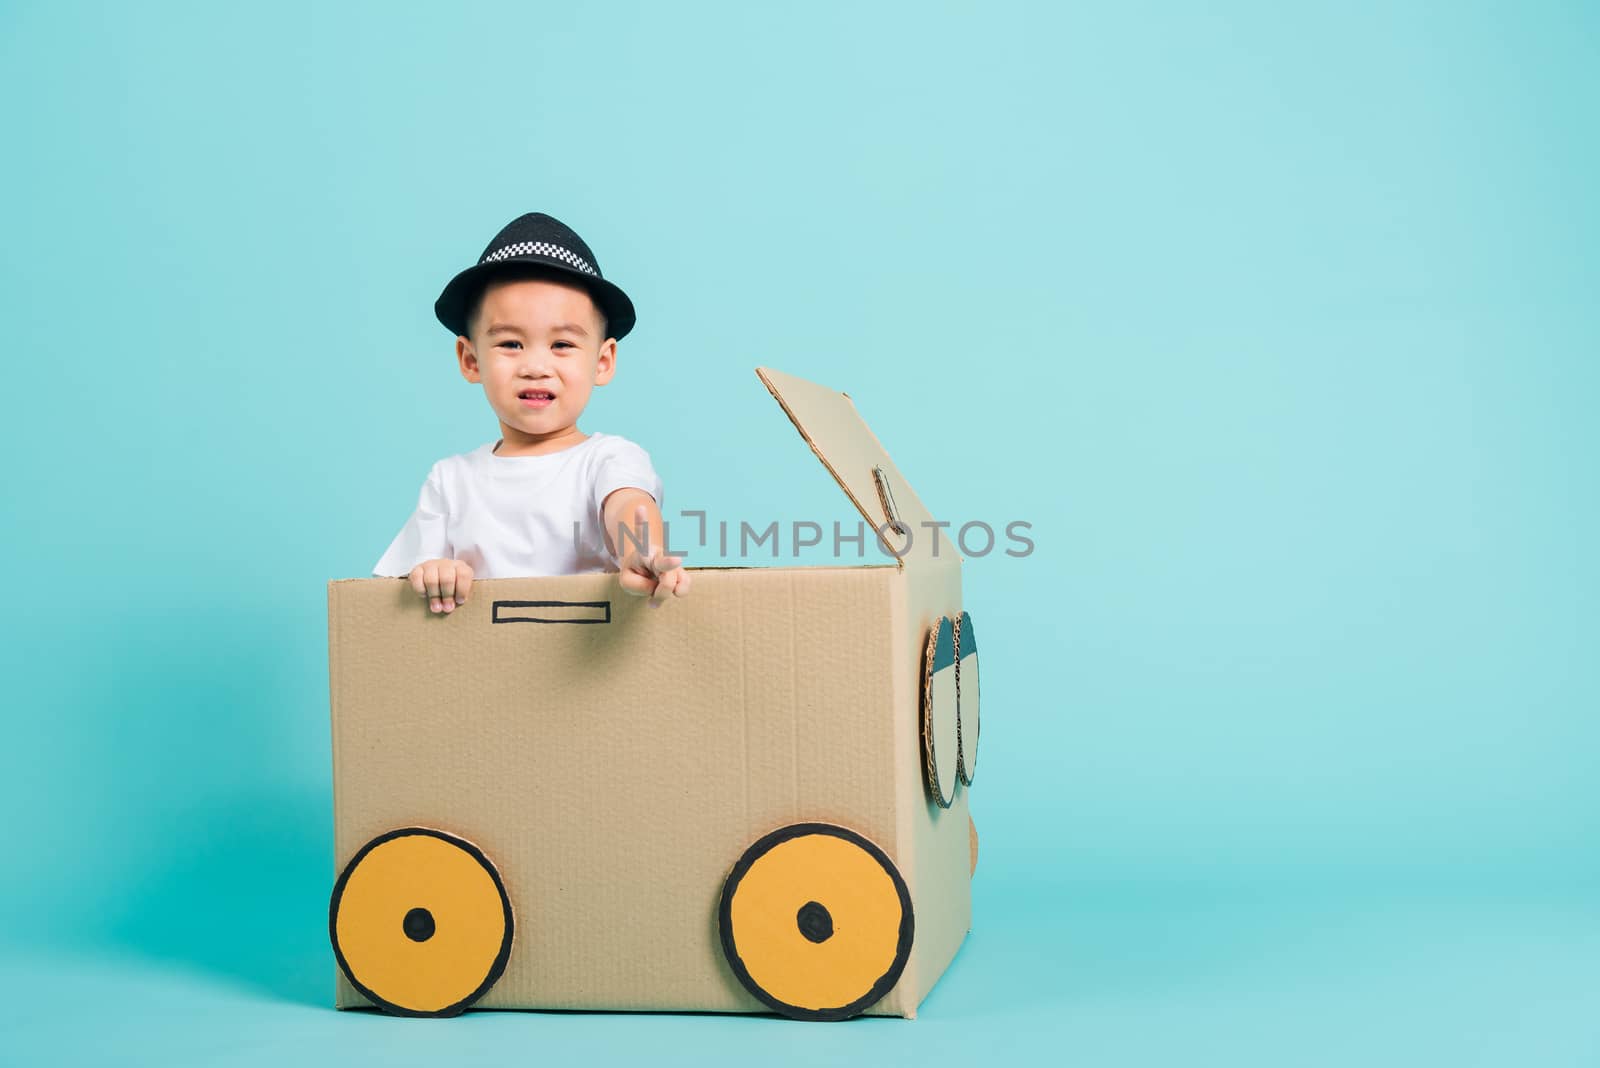 Happy Asian children boy smile in driving play car creative by a cardboard box imagination, summer holiday travel concept, studio shot on blue background with copy space for text